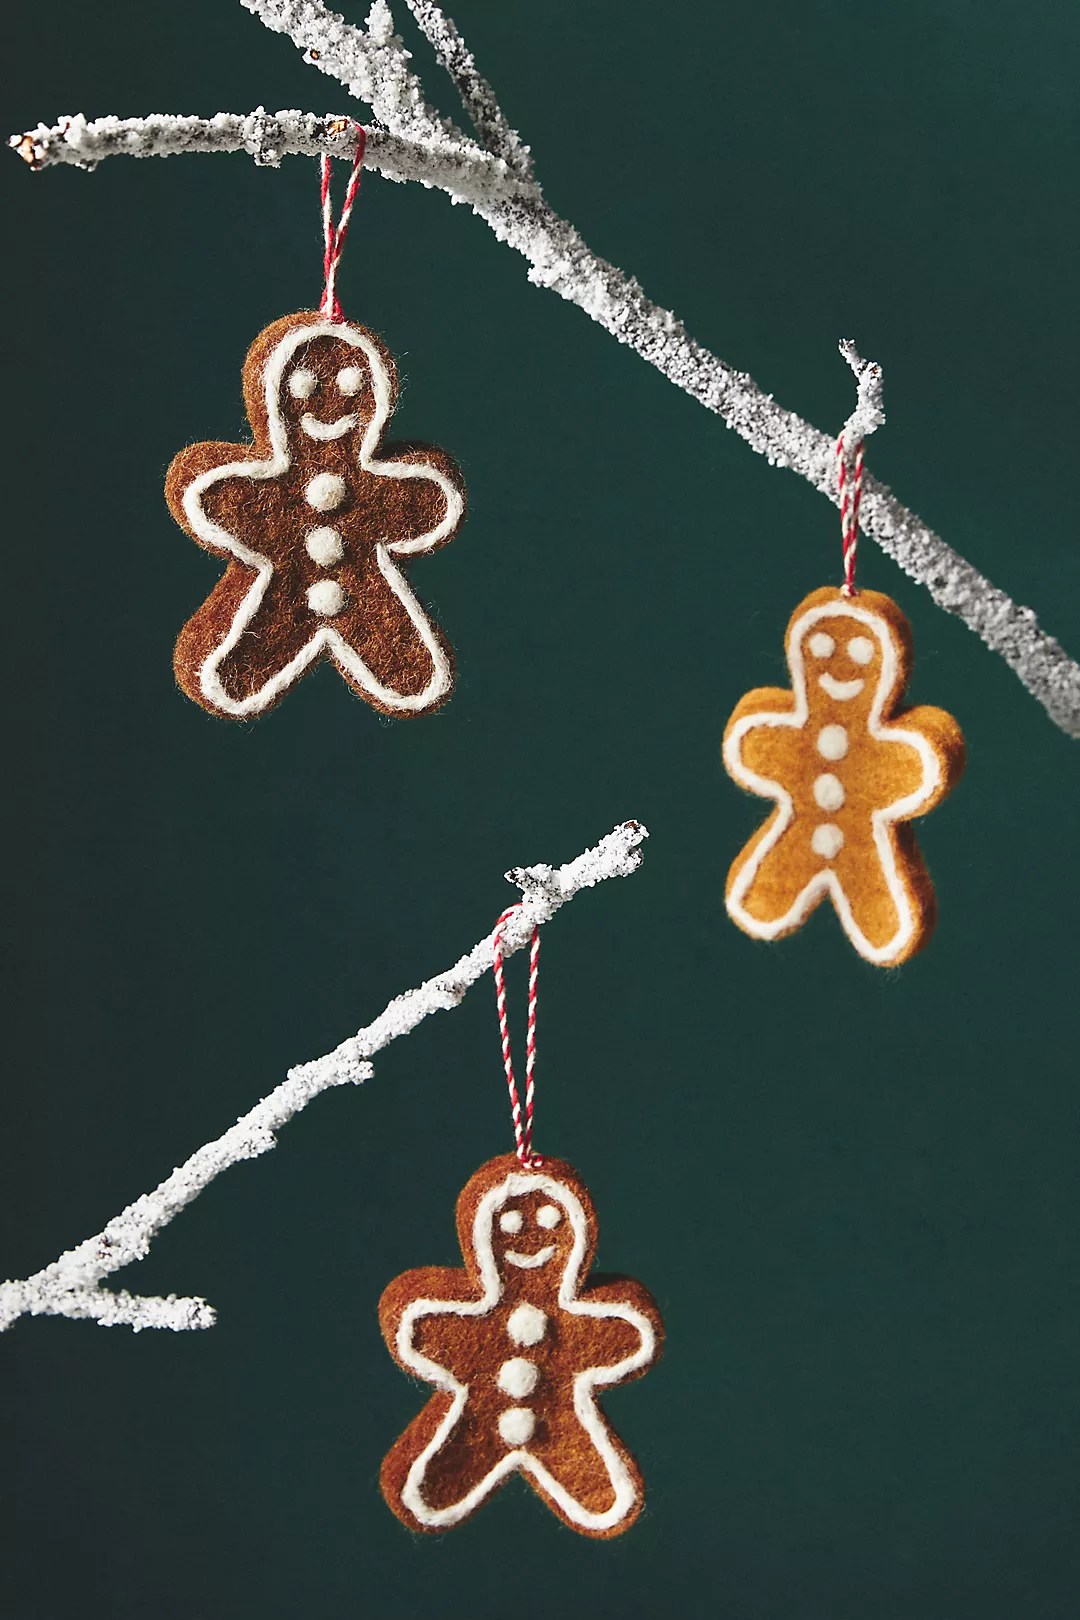 gingerbread christmas ornaments from anthropologie black friday sale hanging on branches on a dark green background